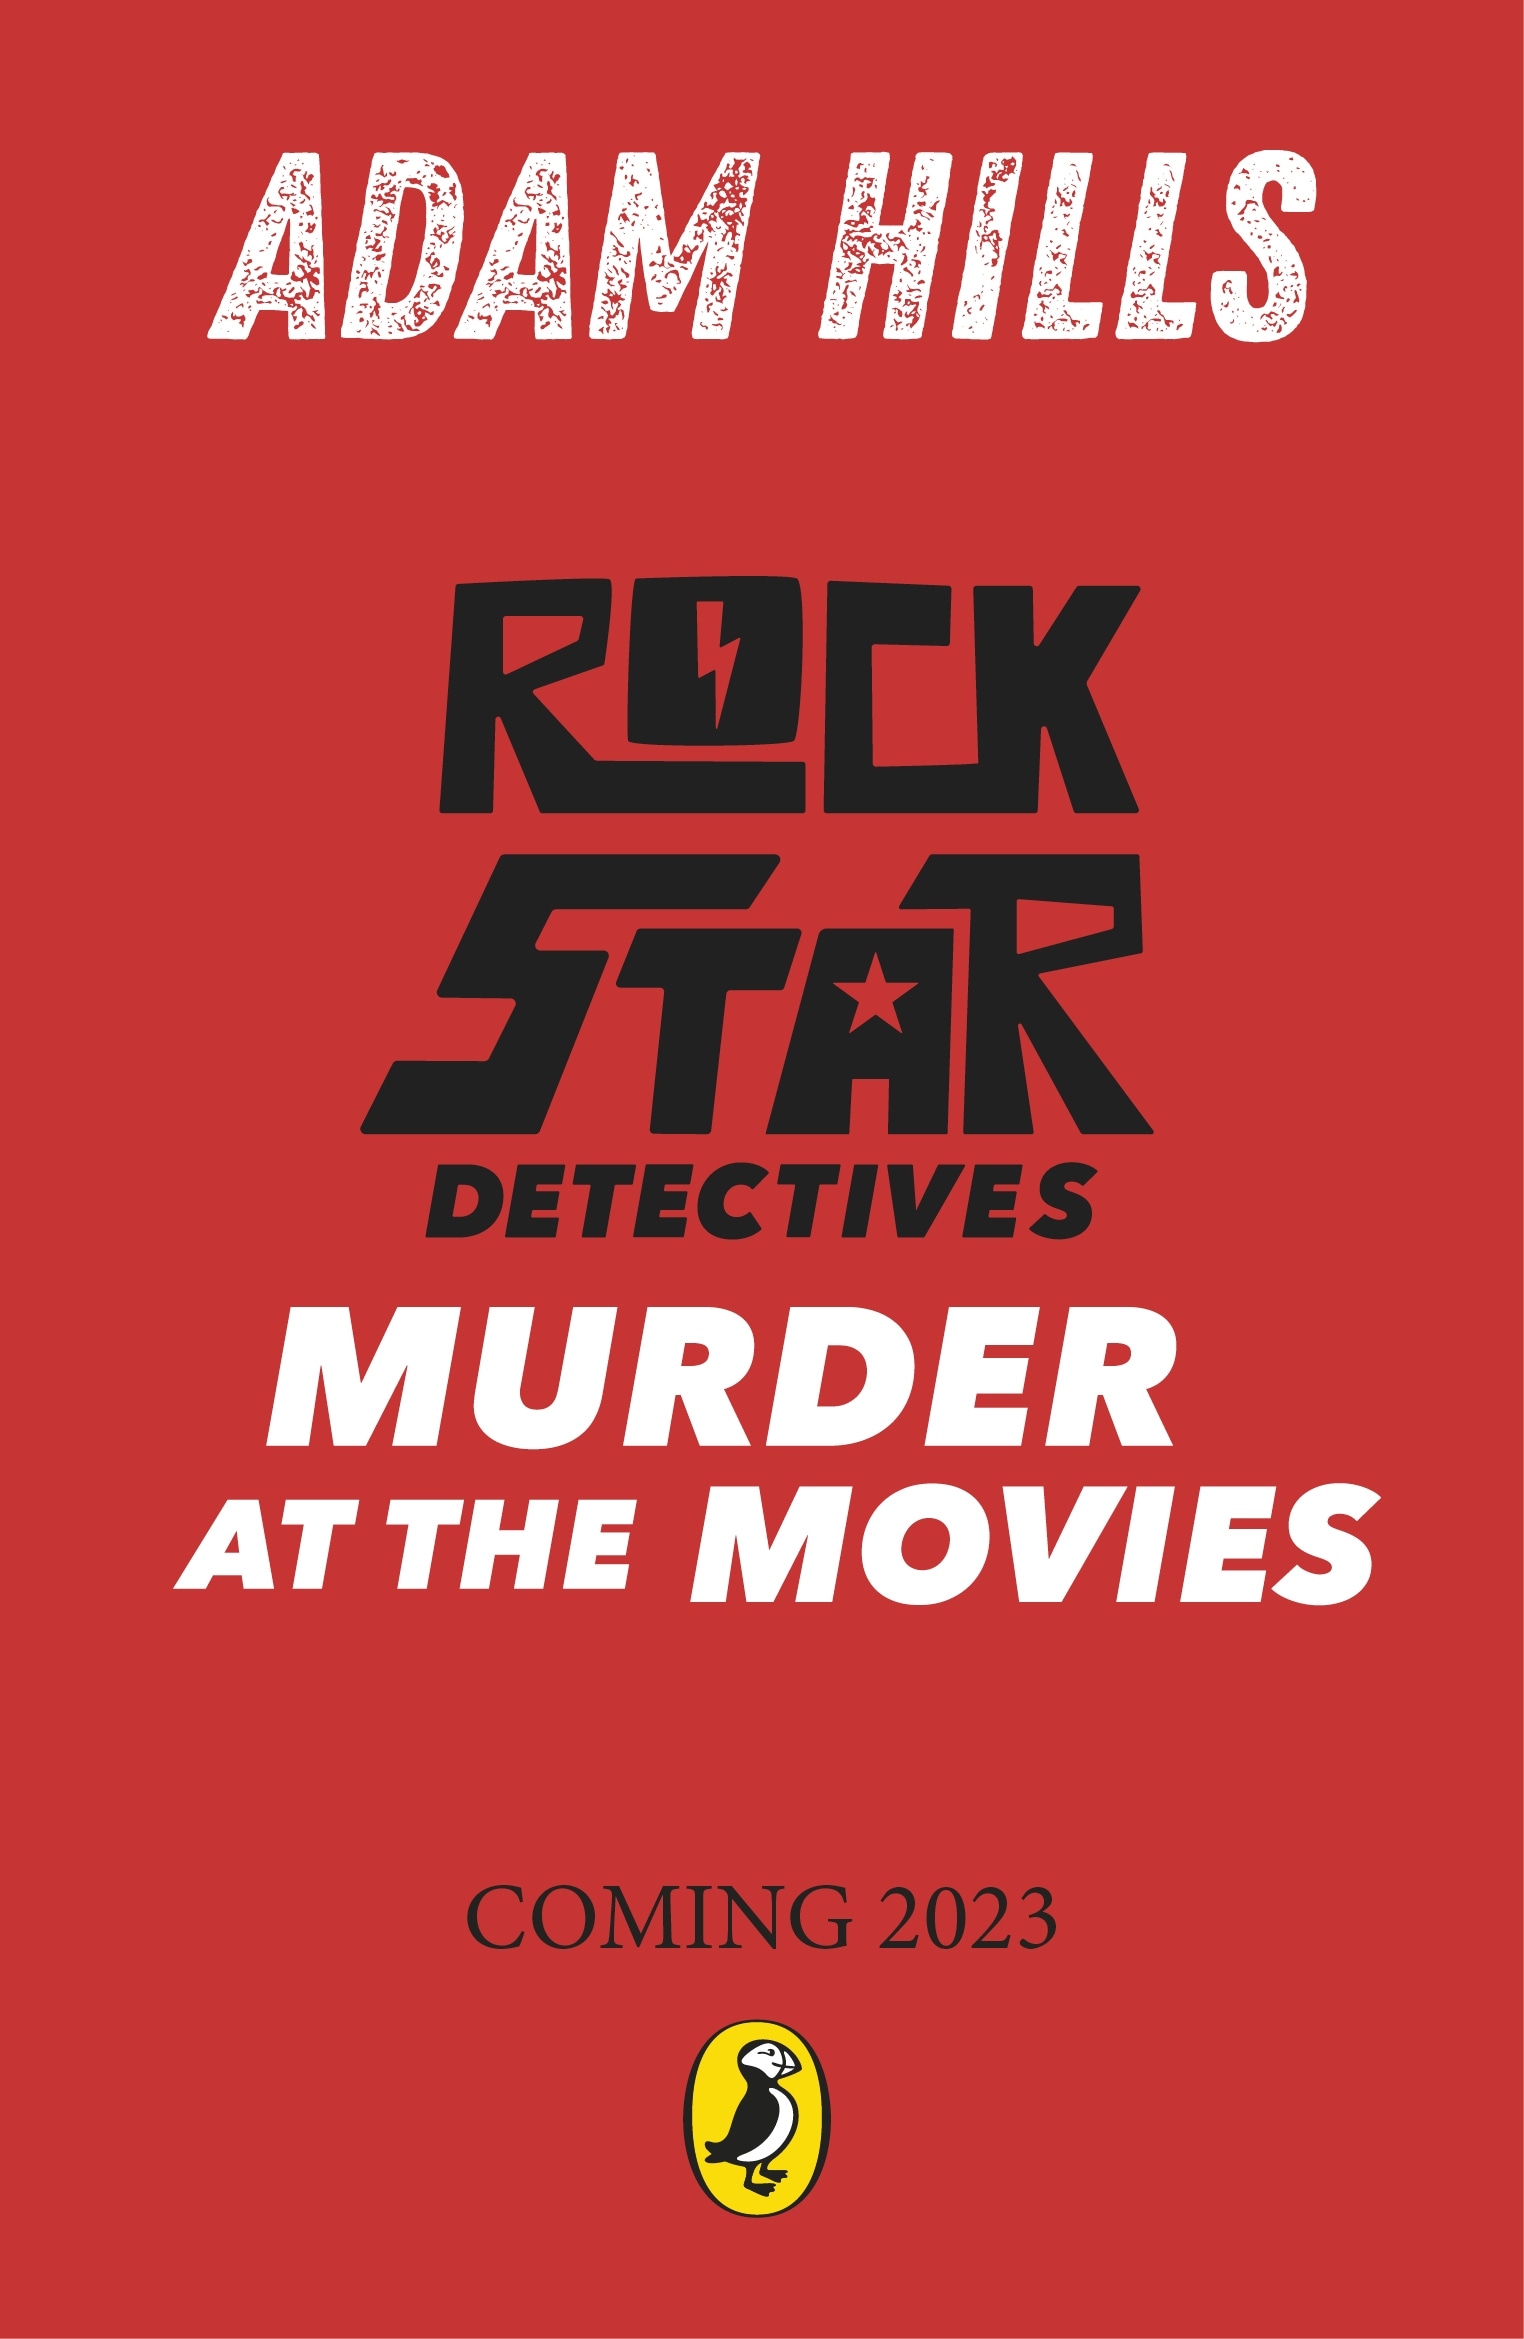 Book “Rockstar Detectives: Murder at the Movies” by Adam Hills — February 2, 2023